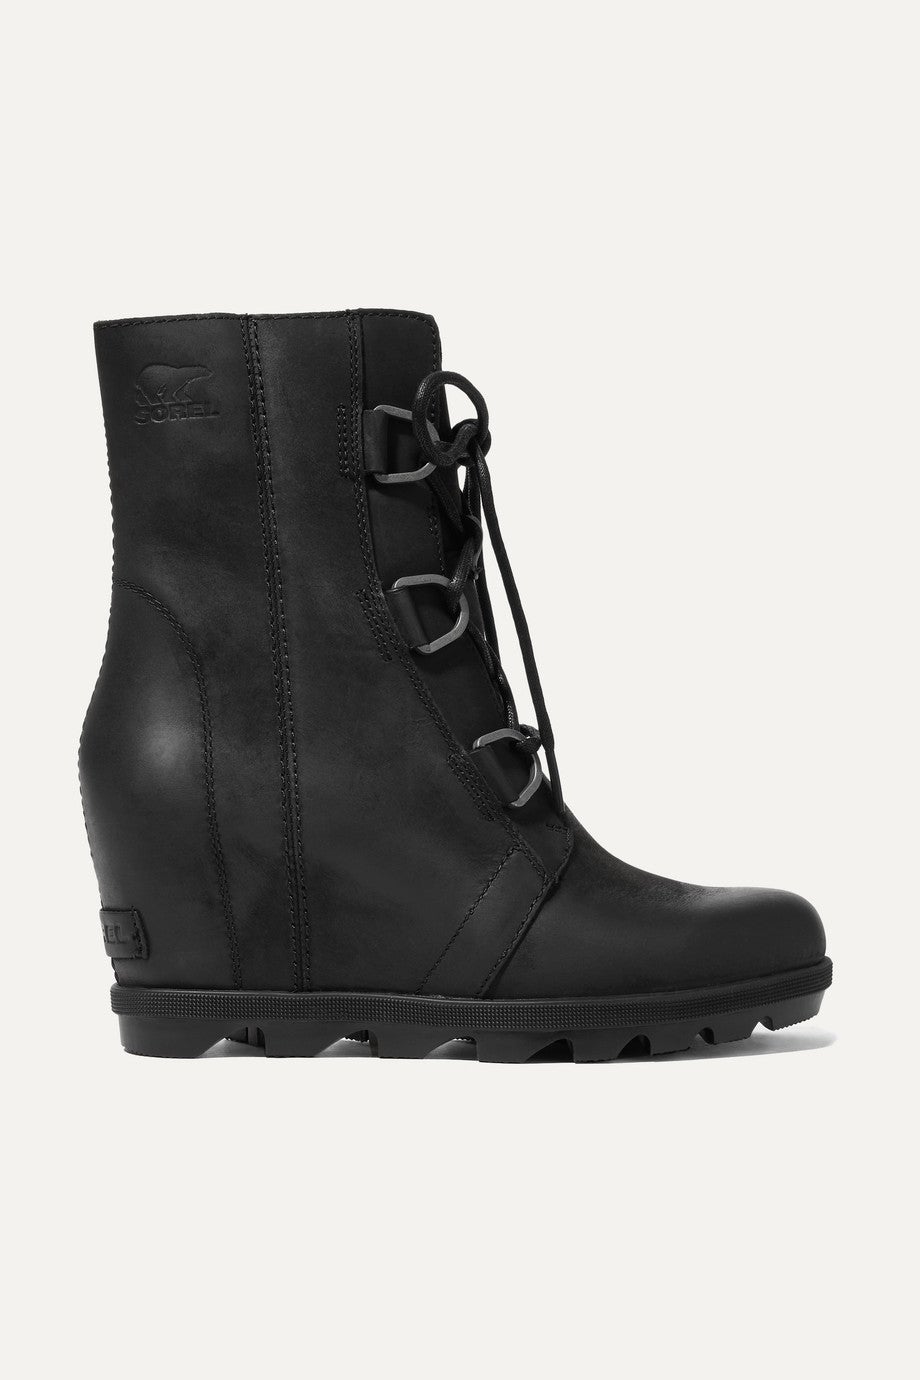 SOREL + Joan of Arctic Wedge II waterproof leather and rubber ankle boots